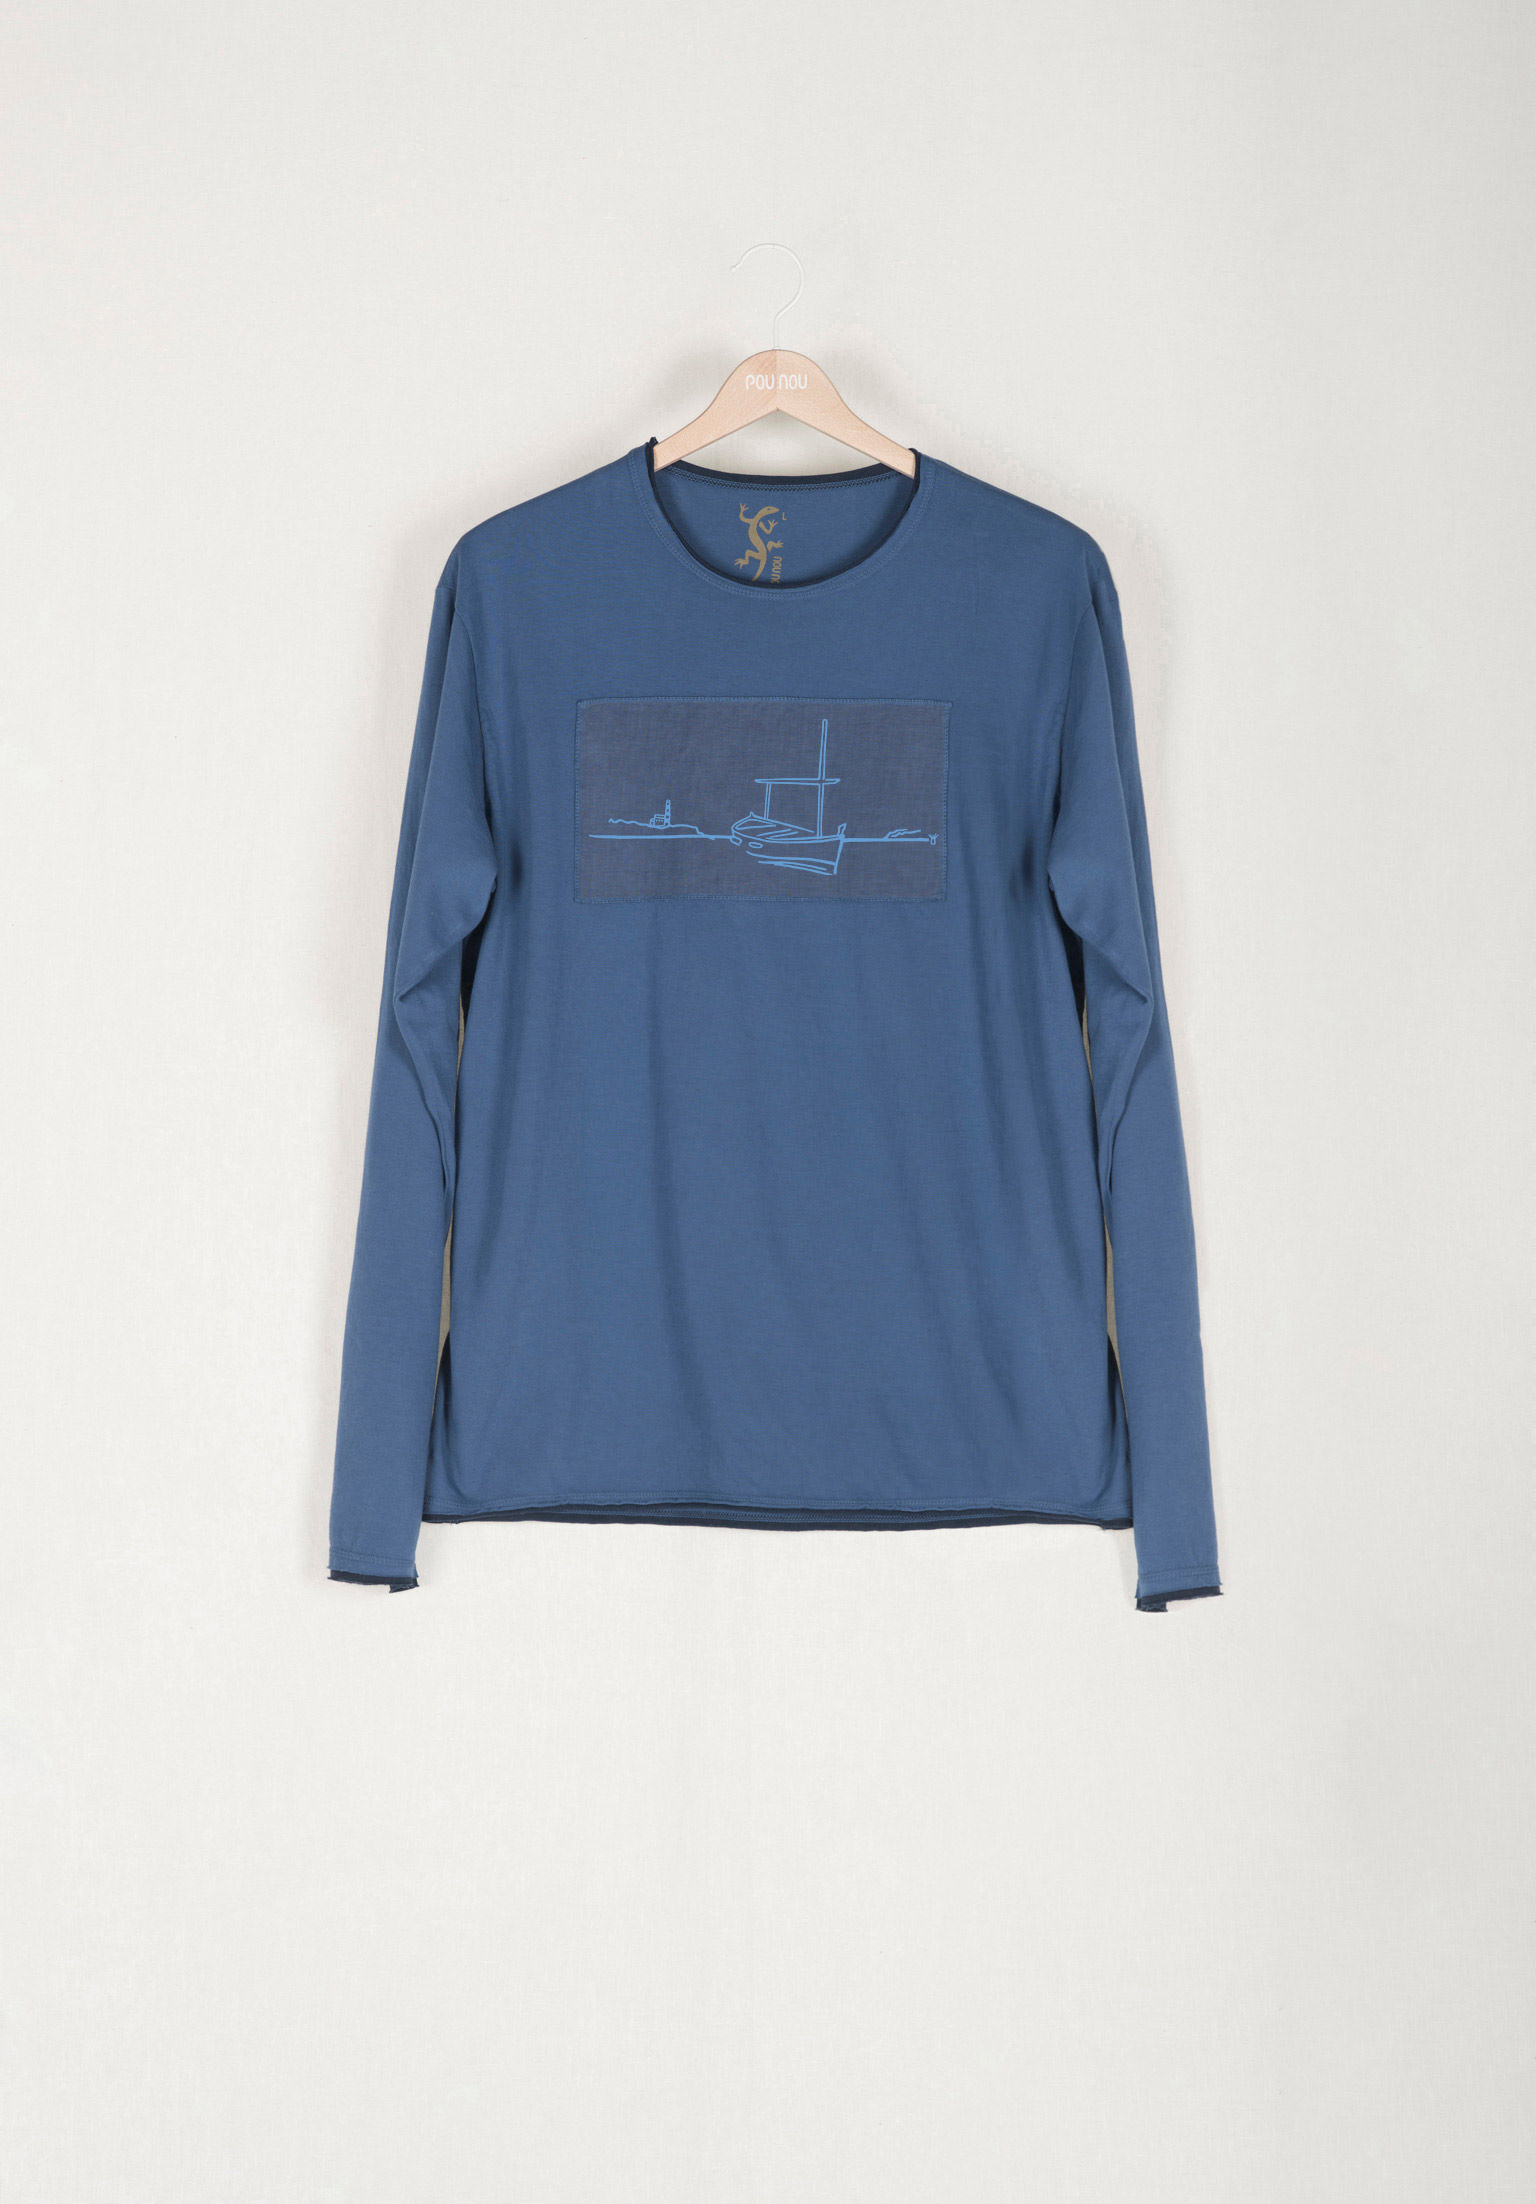 Long-sleeved t-shirt with horizontal patch by the sea